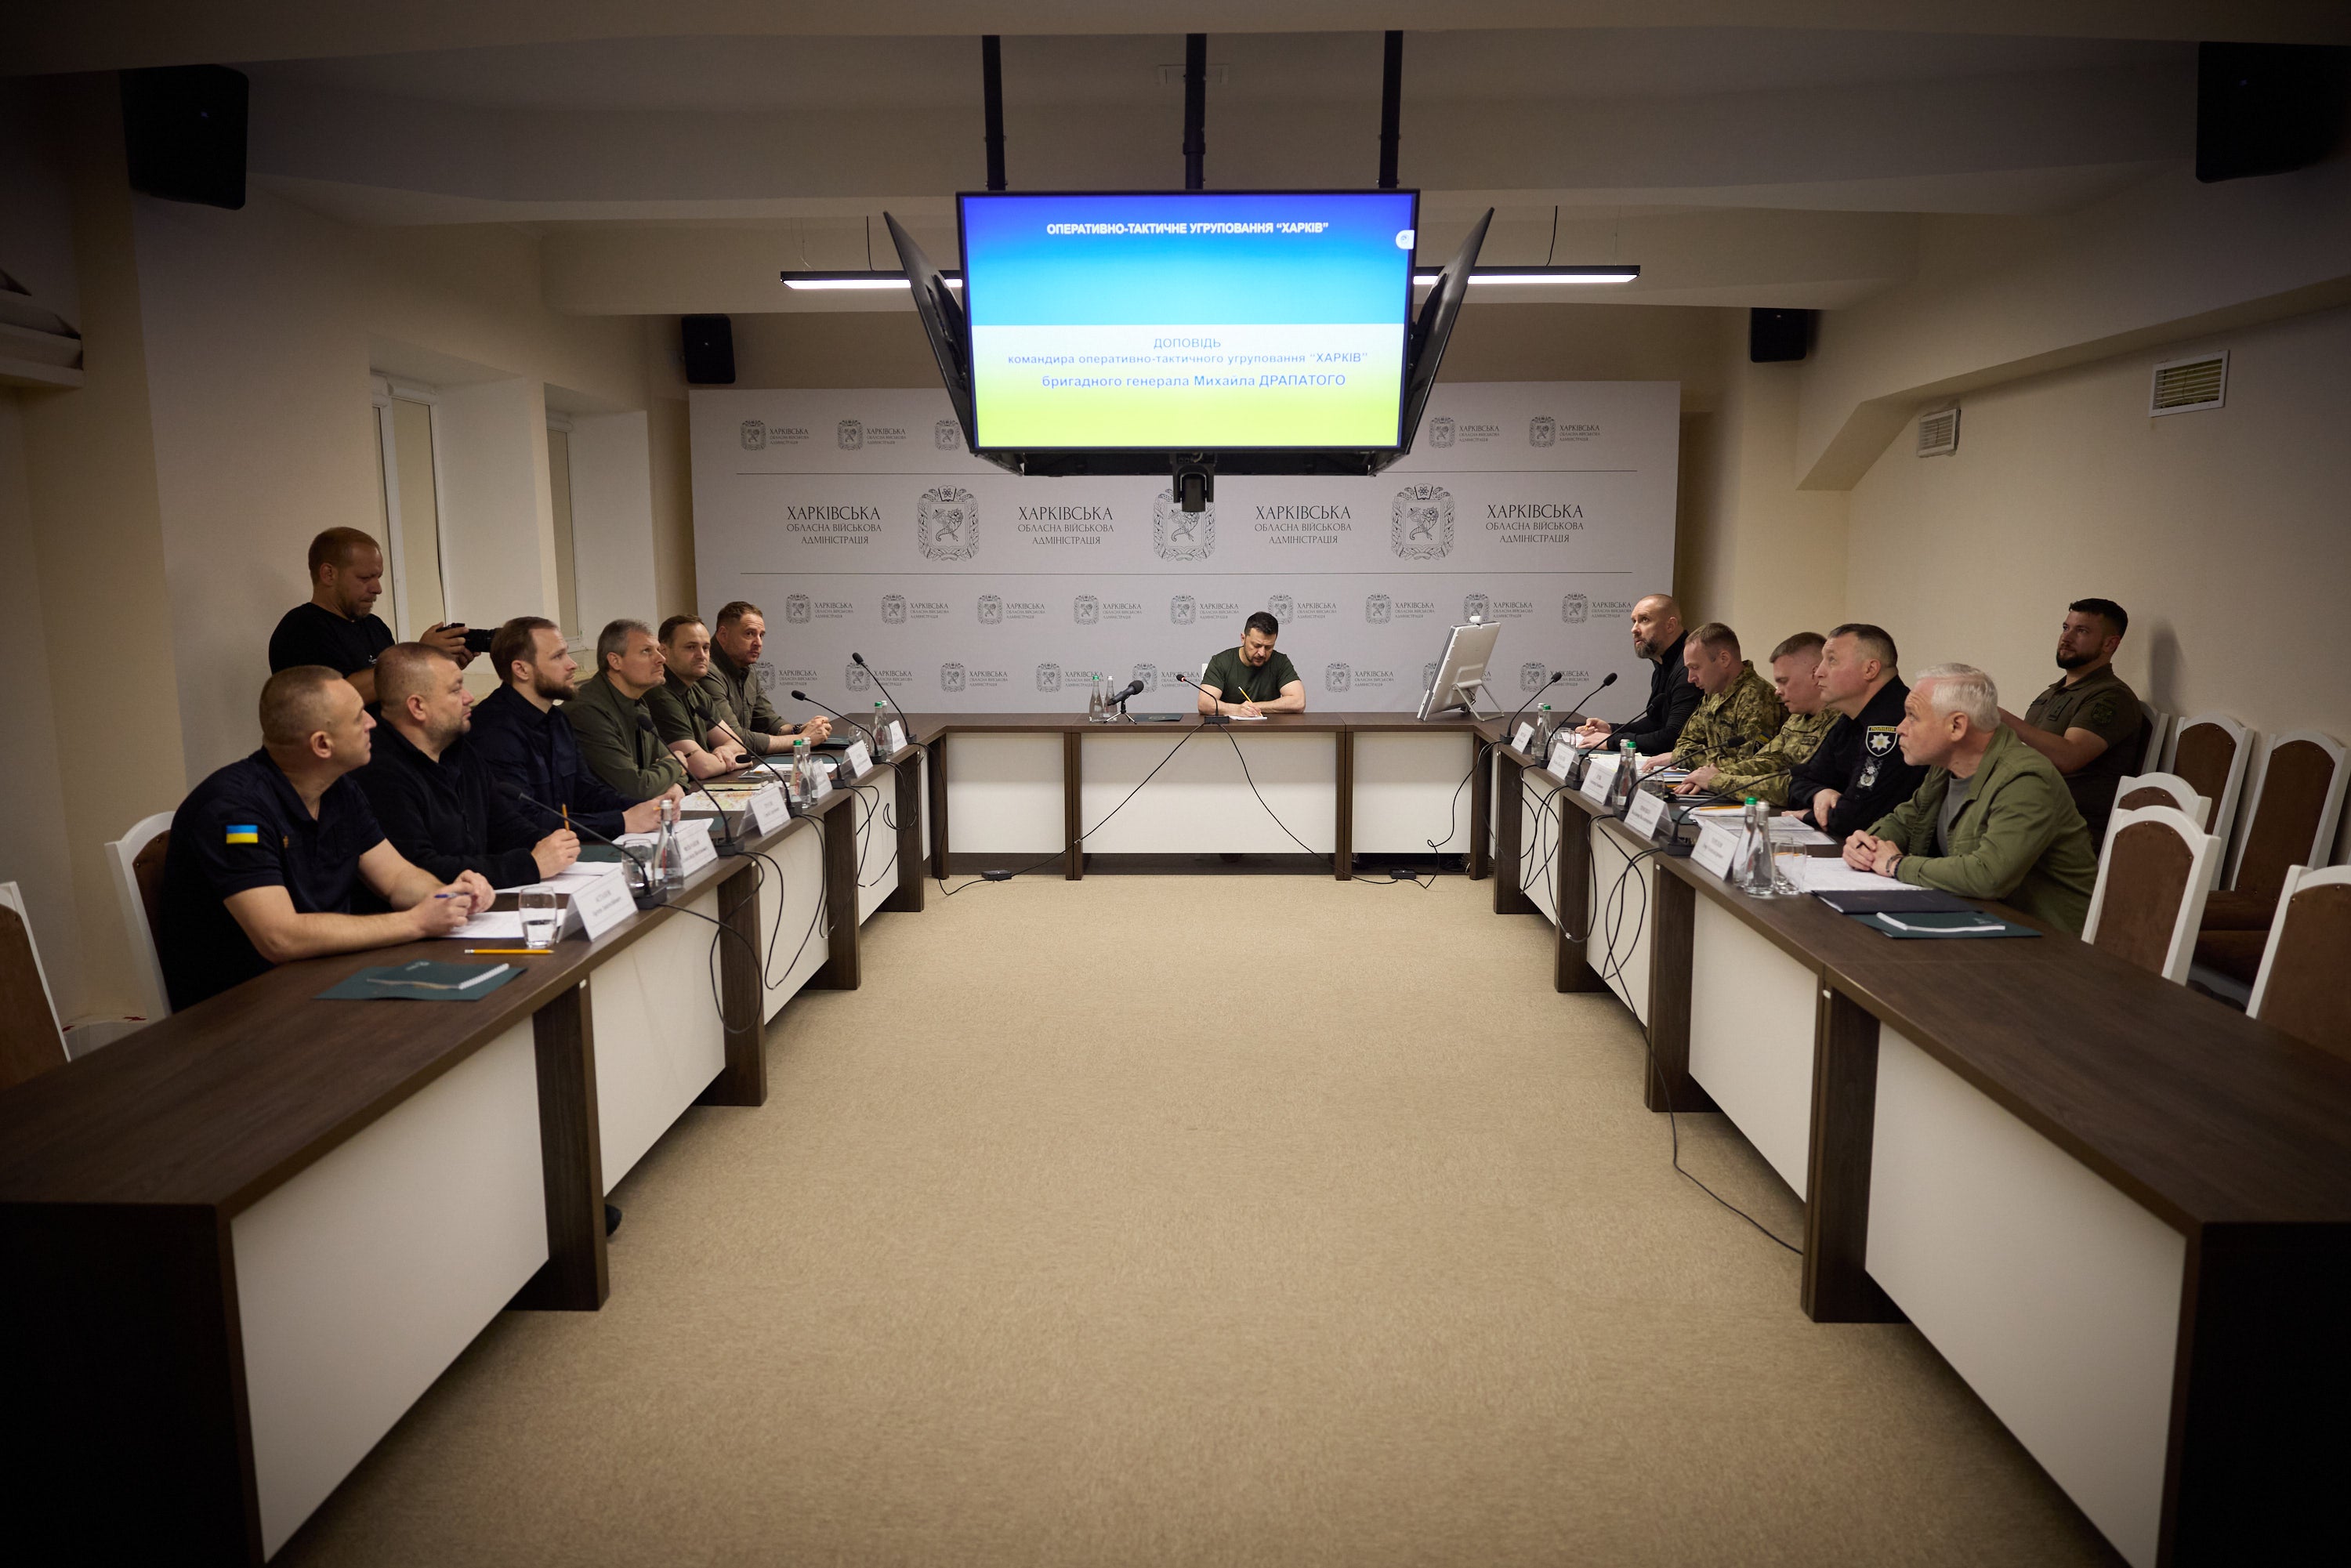 Ukrainian President Volodymyr Zelensky holds a meeting in Kharkiv to discuss, among other topics, the housing needs of evacuees